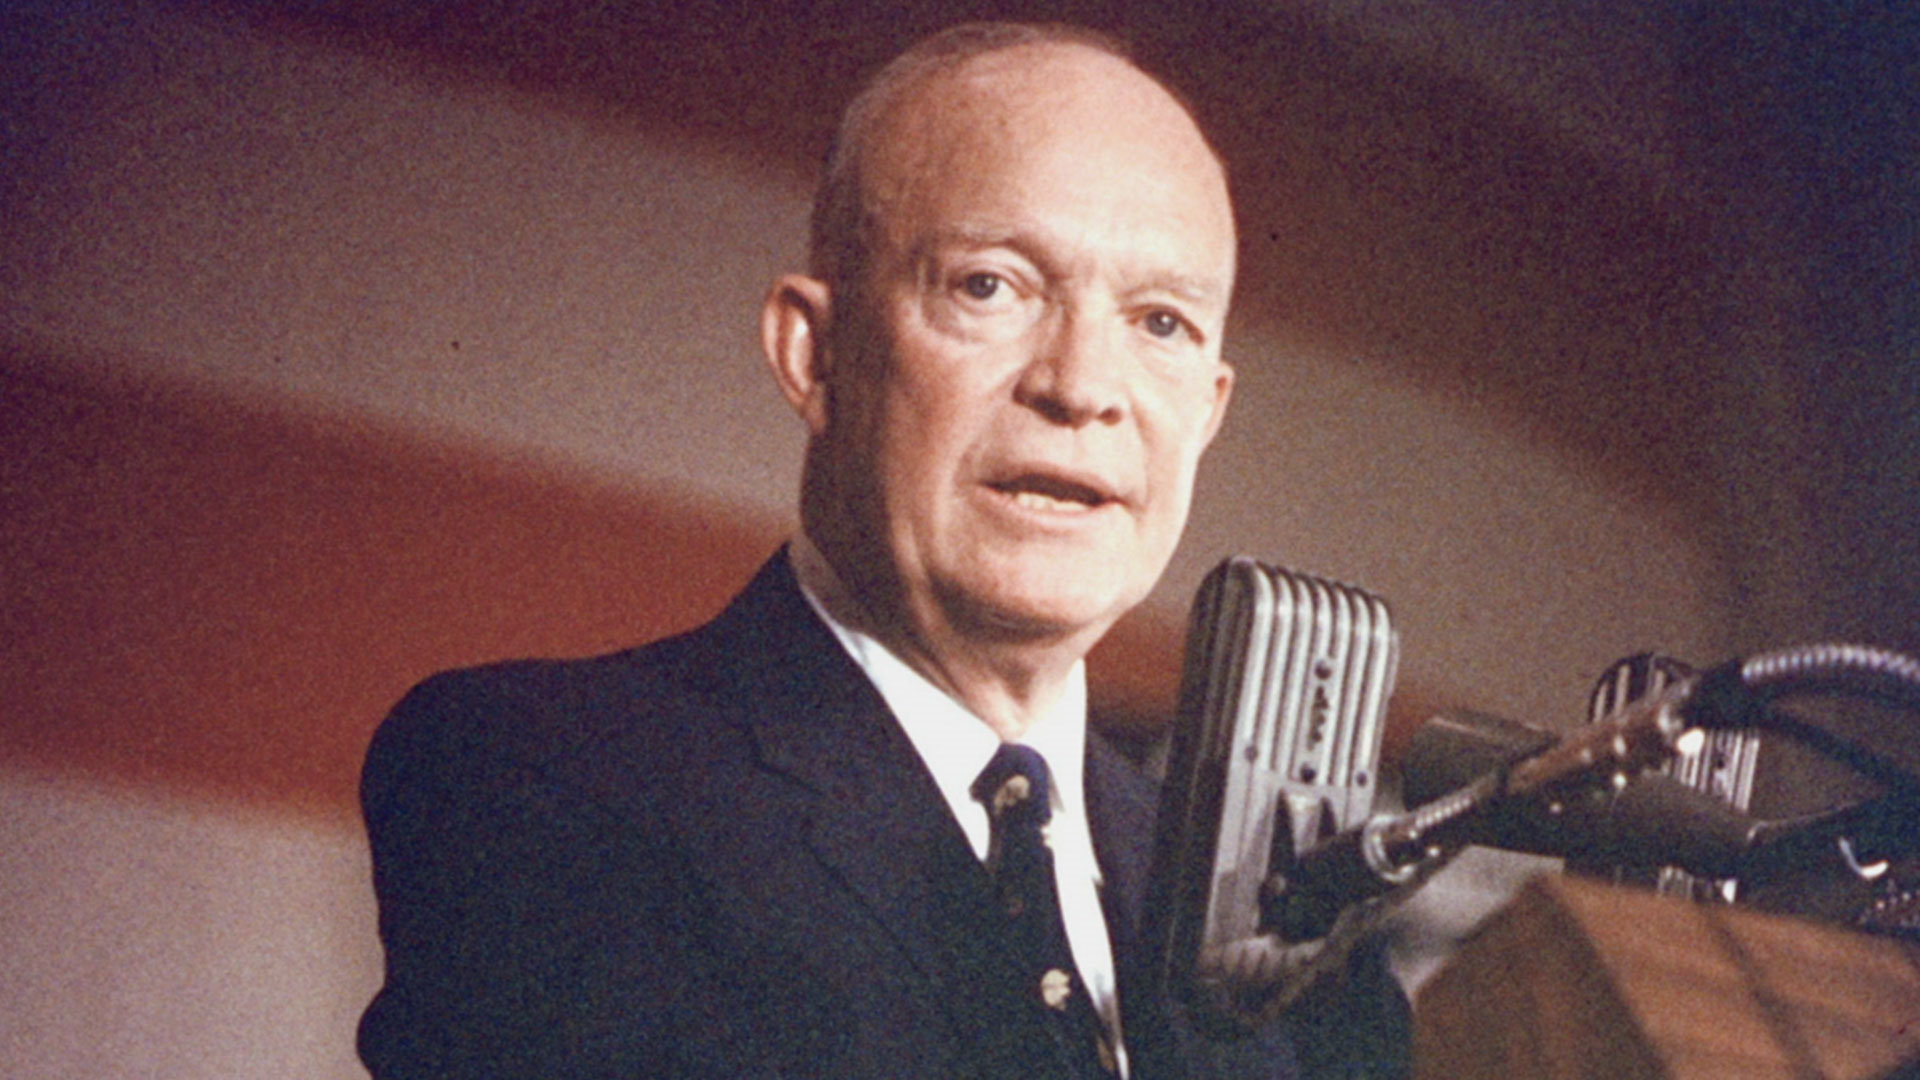 EISENHOWER 34TH PRESIDENT OF THE UNITED STATES DWIGHT D EP-780 8X10 PHOTO 